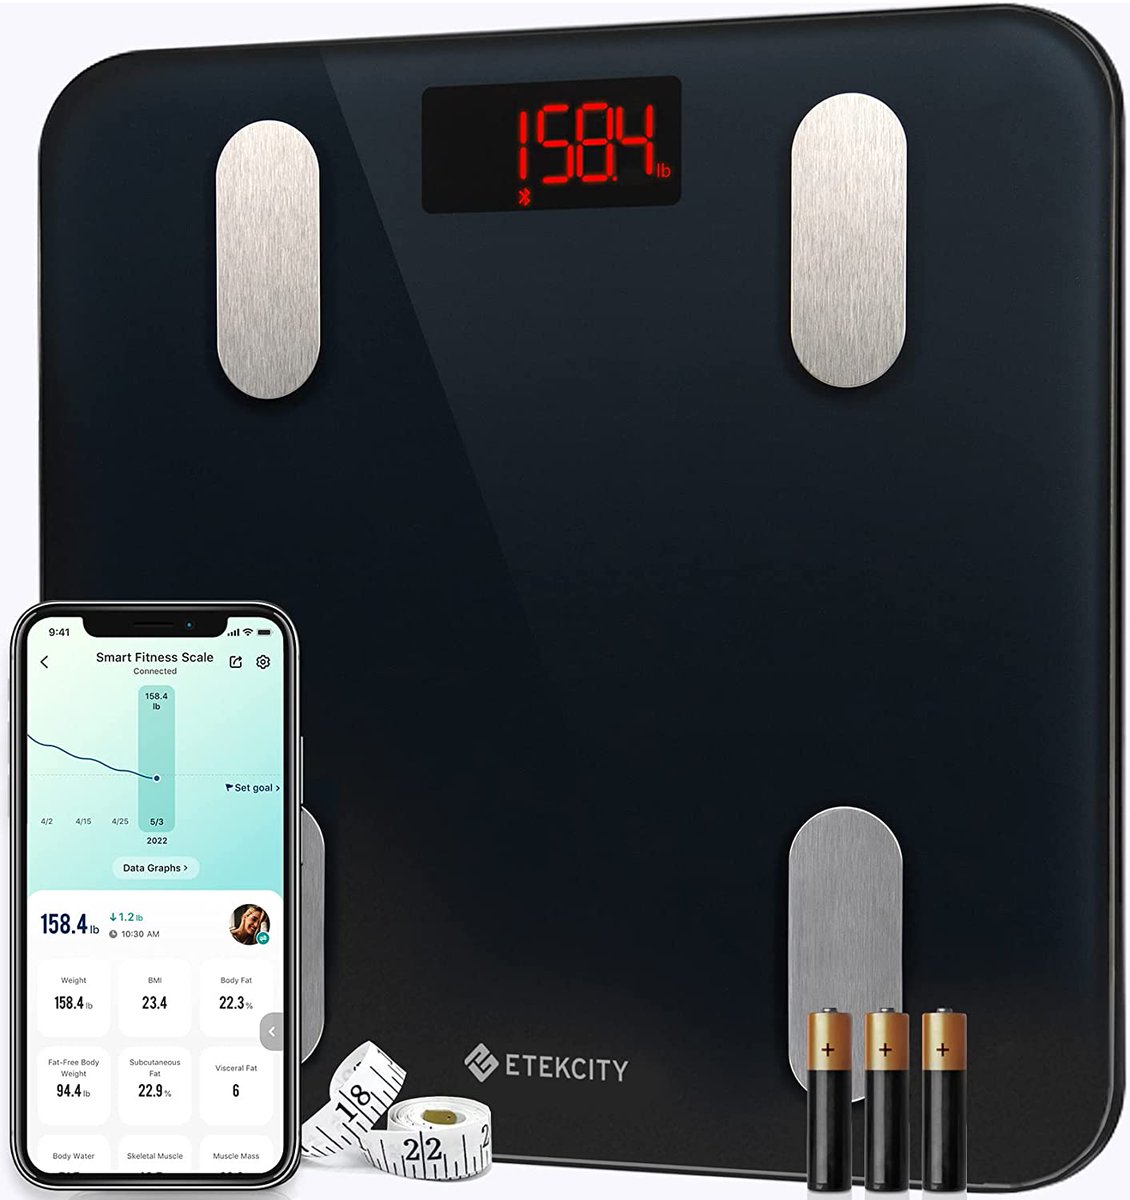 Etekcity Scales for Body Weight Bathroom Digital Weight Scale -- Save 20% -- JUST $19.99

amzn.to/3aTlpJL

#bathroomscale #bathroomscales #bathroomscaledeals #bathroomscaledeal #weightscale #weightscales #weightscaledeals #weightscaledeal #scales #scale #scaledeals